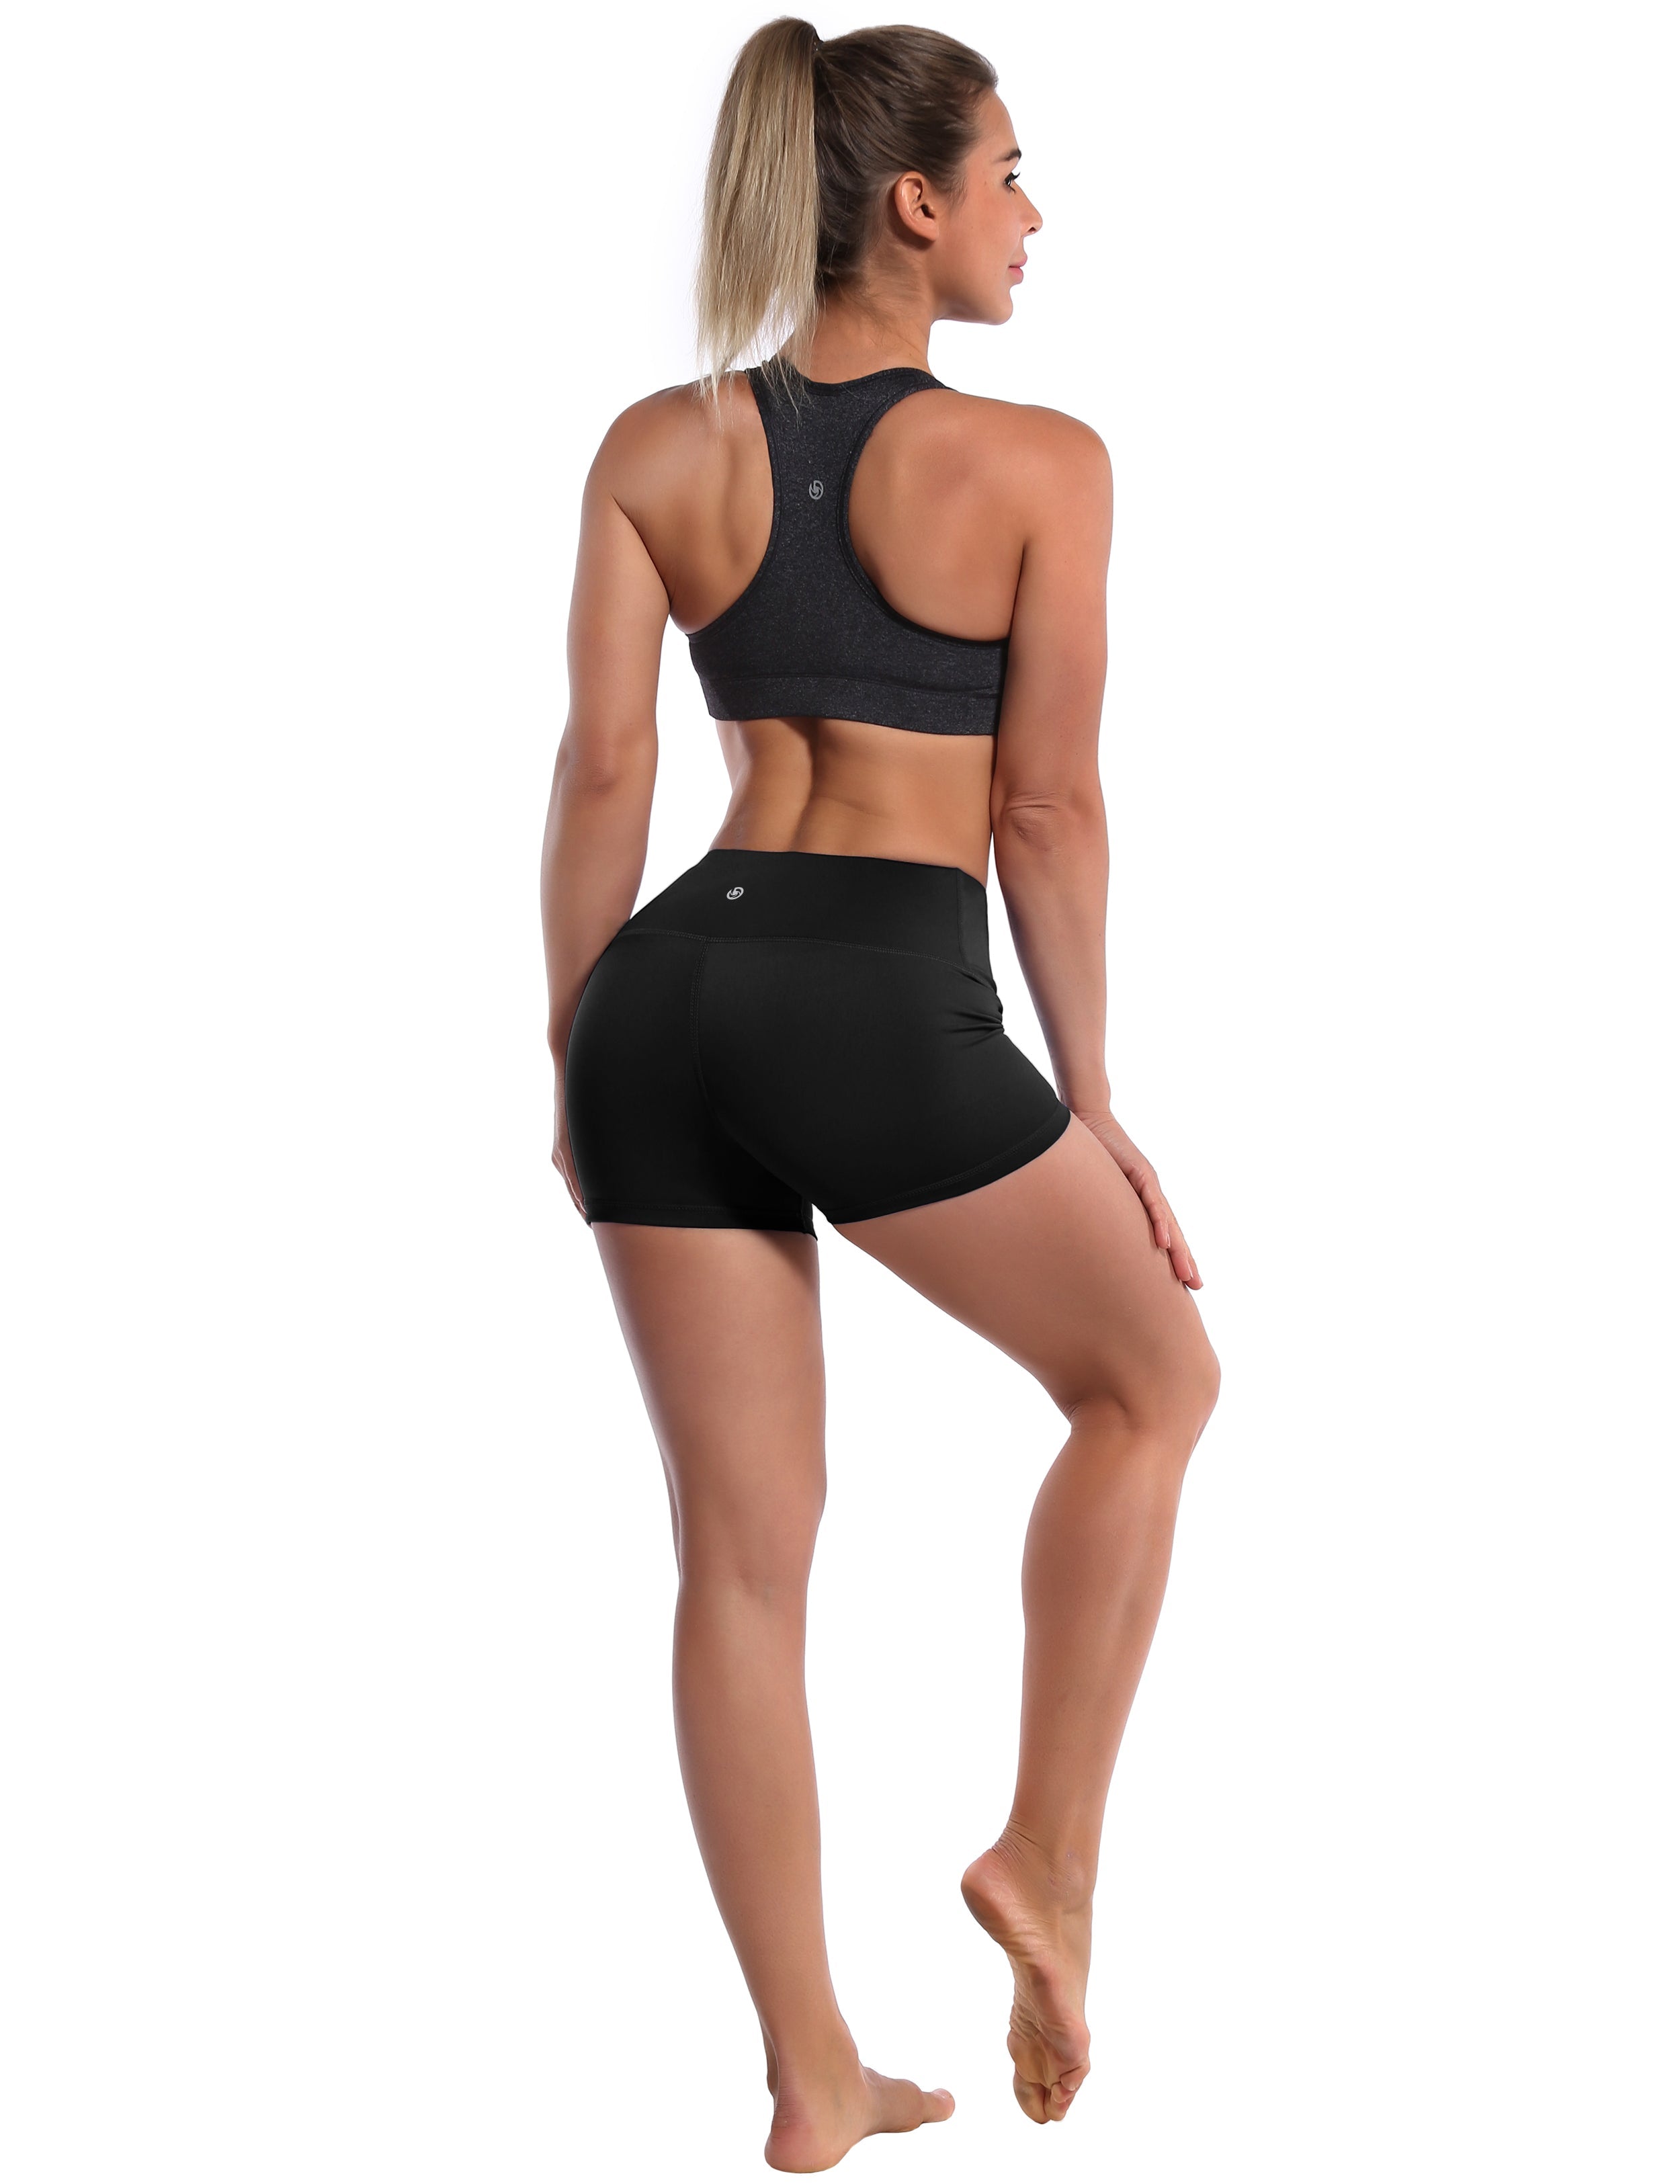 2.5" Golf Shorts black Softest-ever fabric High elasticity High density 4-way stretch Fabric doesn't attract lint easily No see-through Moisture-wicking Machine wash 75% Nylon, 25% Spandex